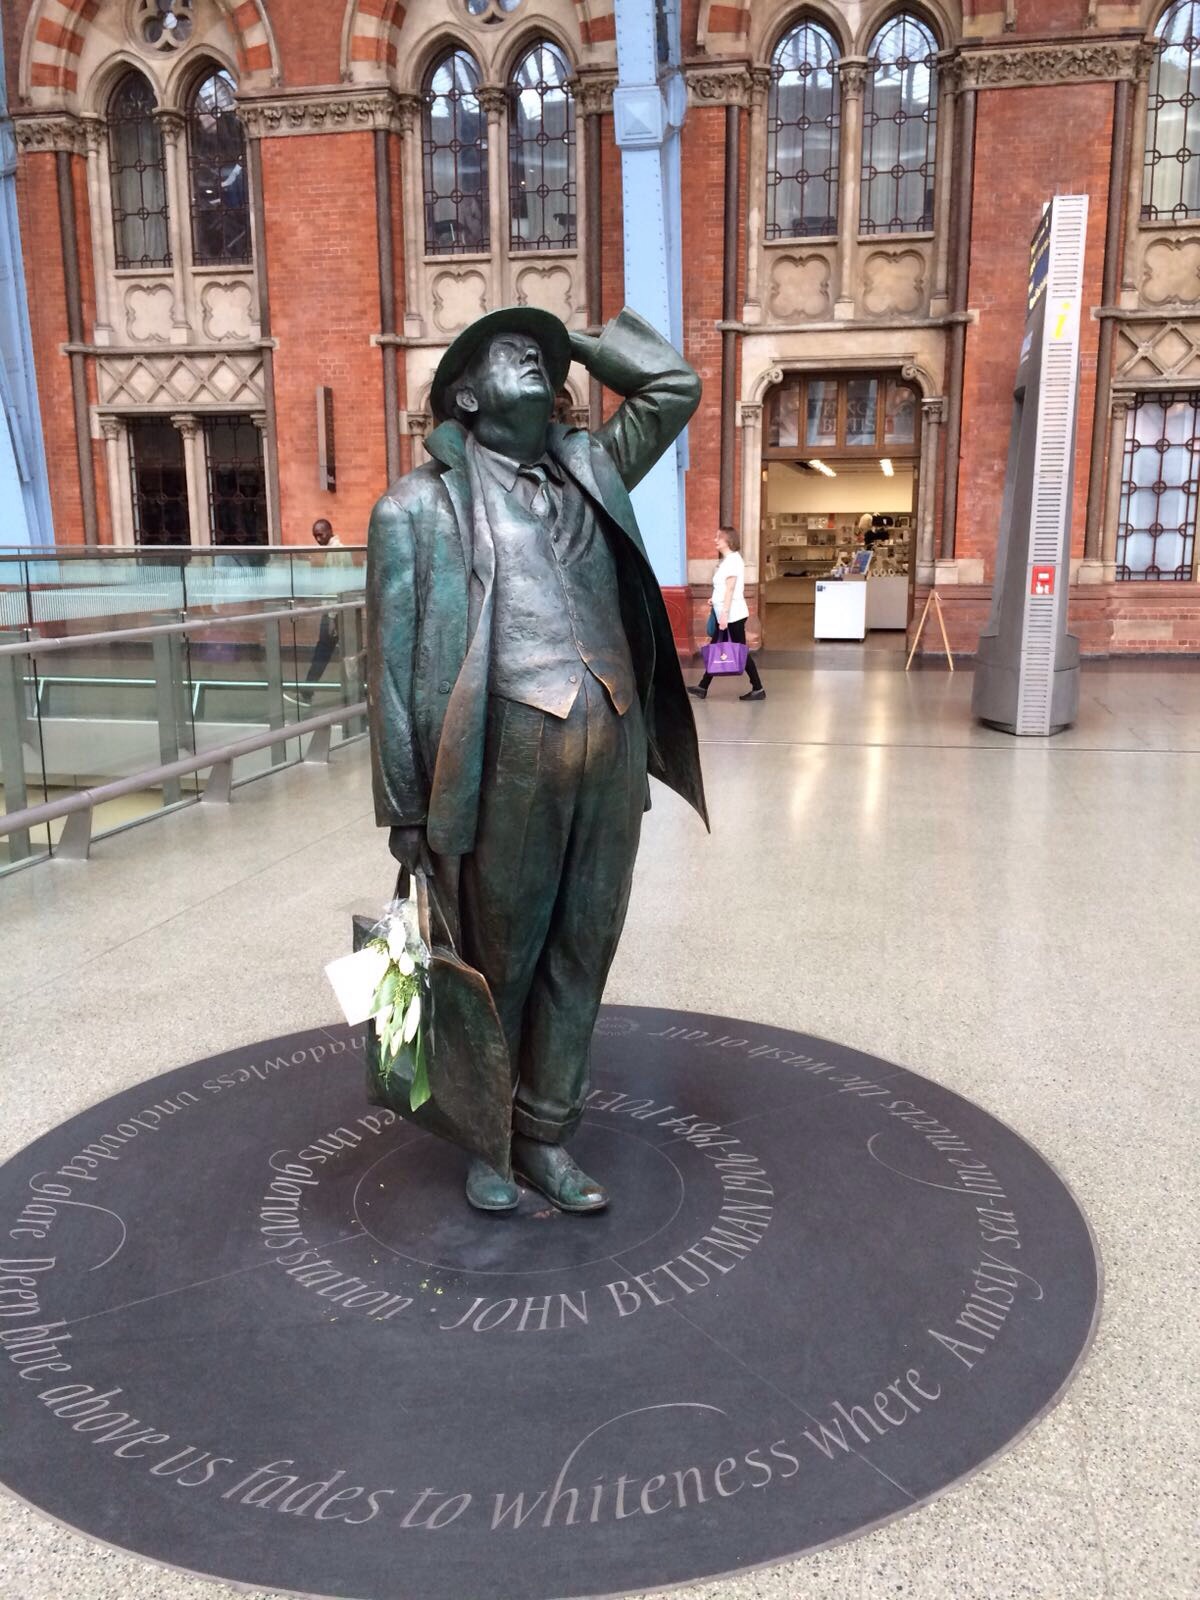 Sir John Betjeman and  an embracing couple  are amongst the icons at  the Meeting Place  St.Pancras Station. Top Tip : you don't have to meet anyone there to enjoy the sculpture